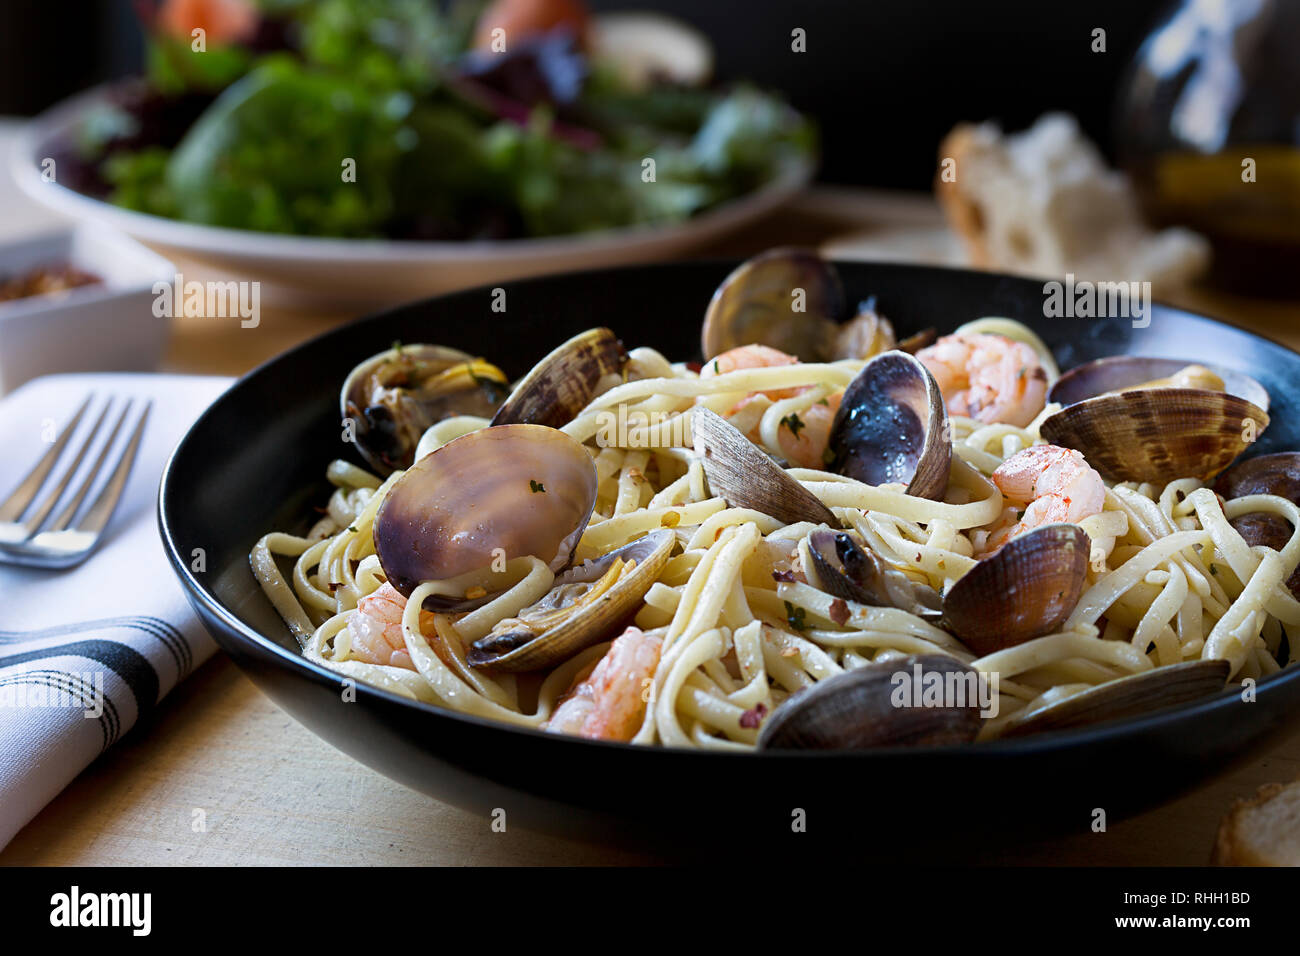 Bowl of spaghetti pasta with seafood- clams and shrimp- on wooden table with fork, napkin, and side salad. Stock Photo